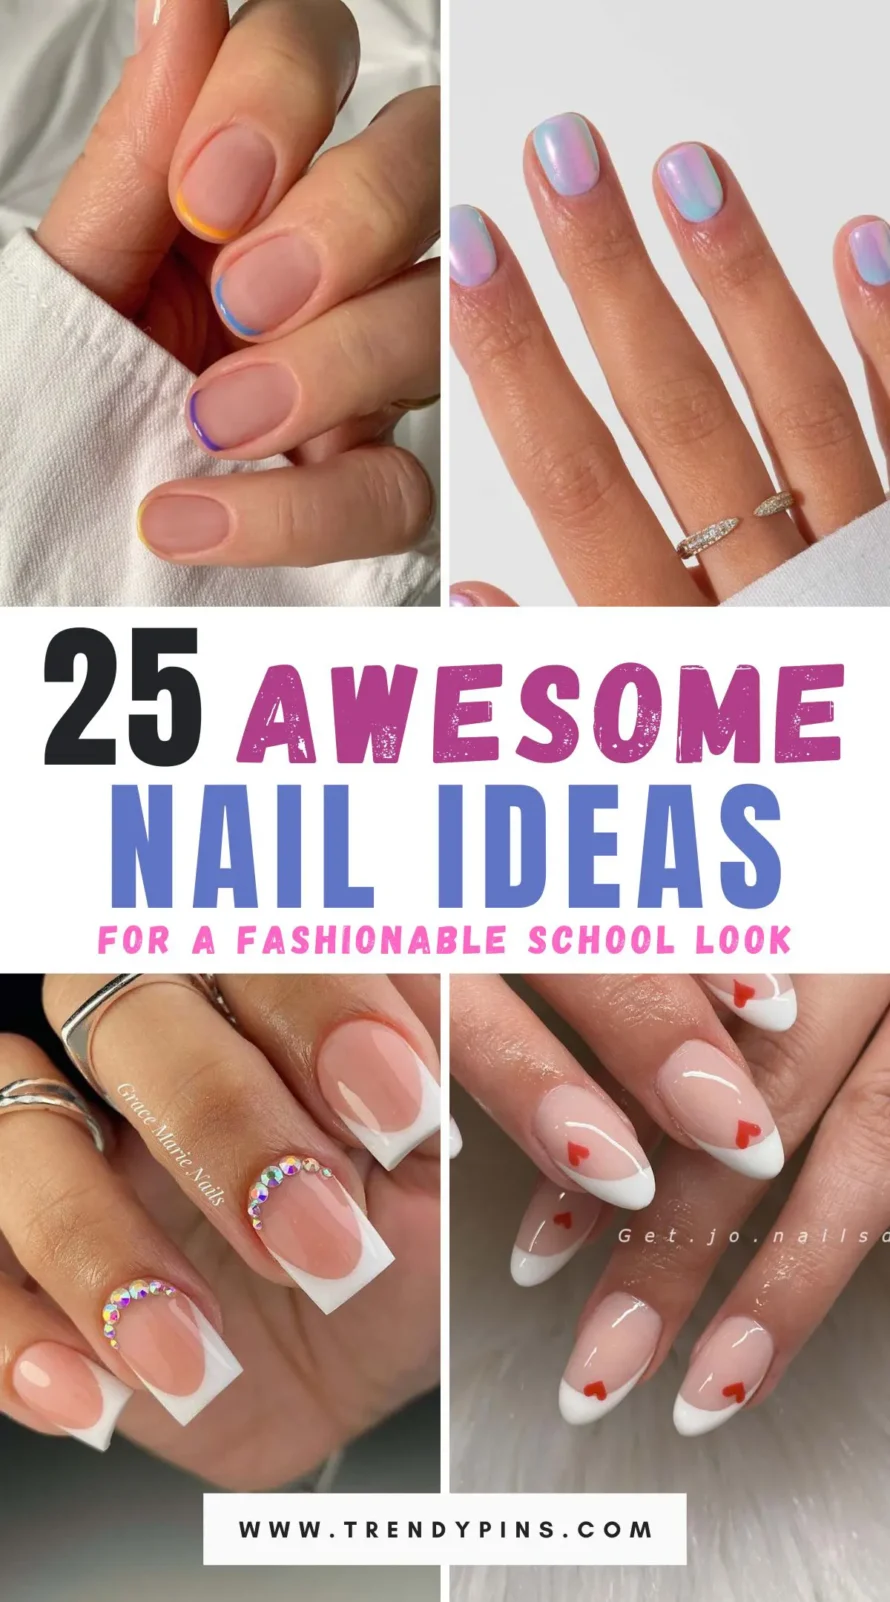 Discover 25 chic and trendy nail ideas perfect for school days. From minimalist designs to bold colors, find the perfect style to make your nails pop!